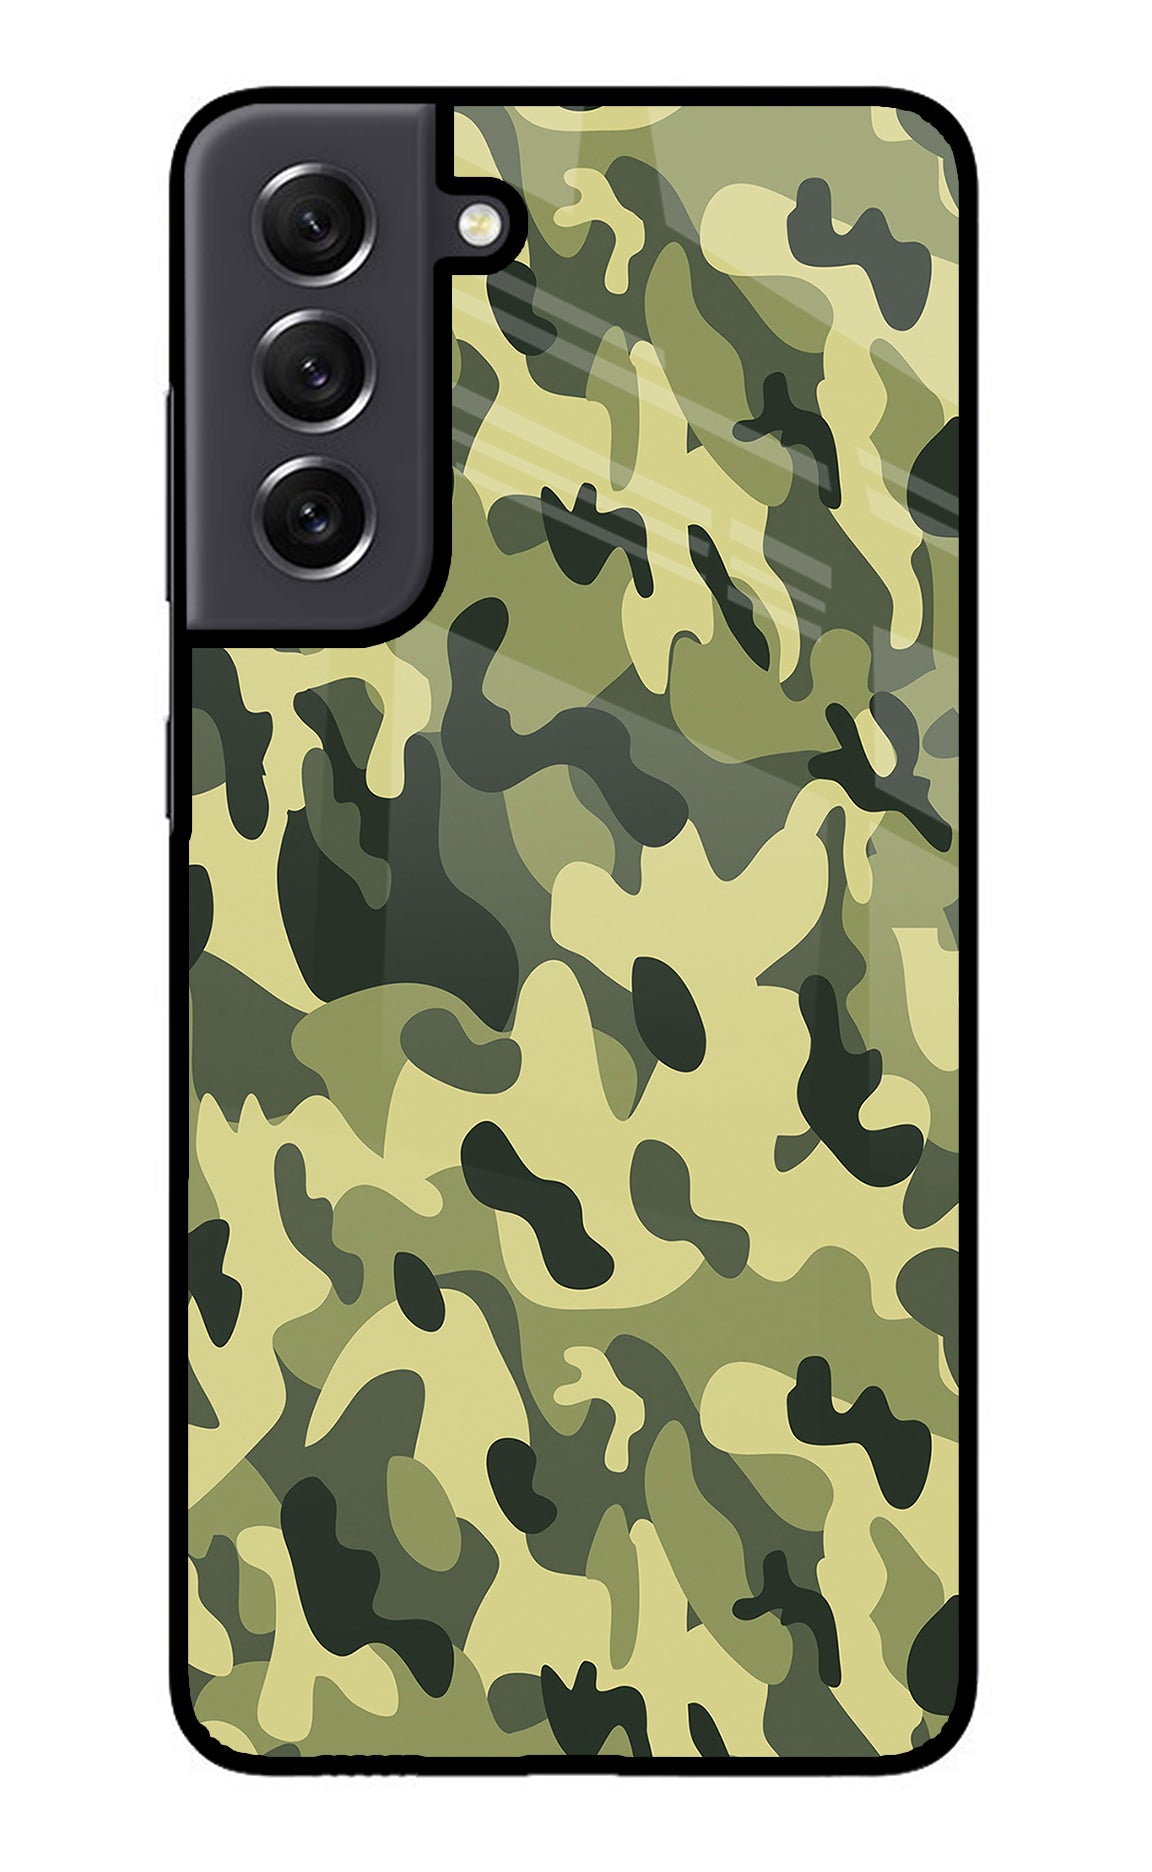 Camouflage Samsung S21 FE 5G Back Cover